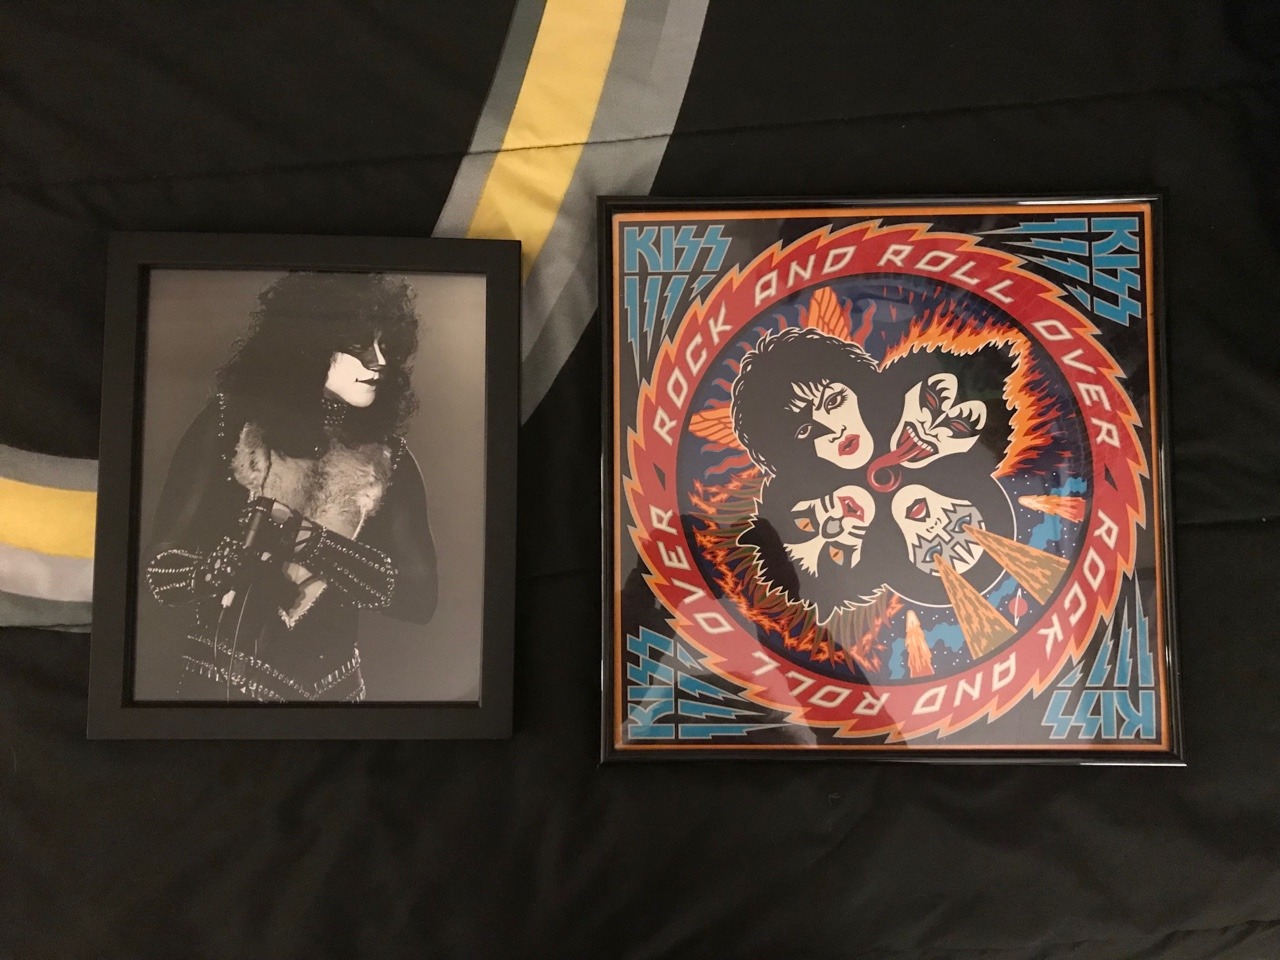 ajakkson:  So excited to hang these bad boys up!! I bought the Eric Carr print (which